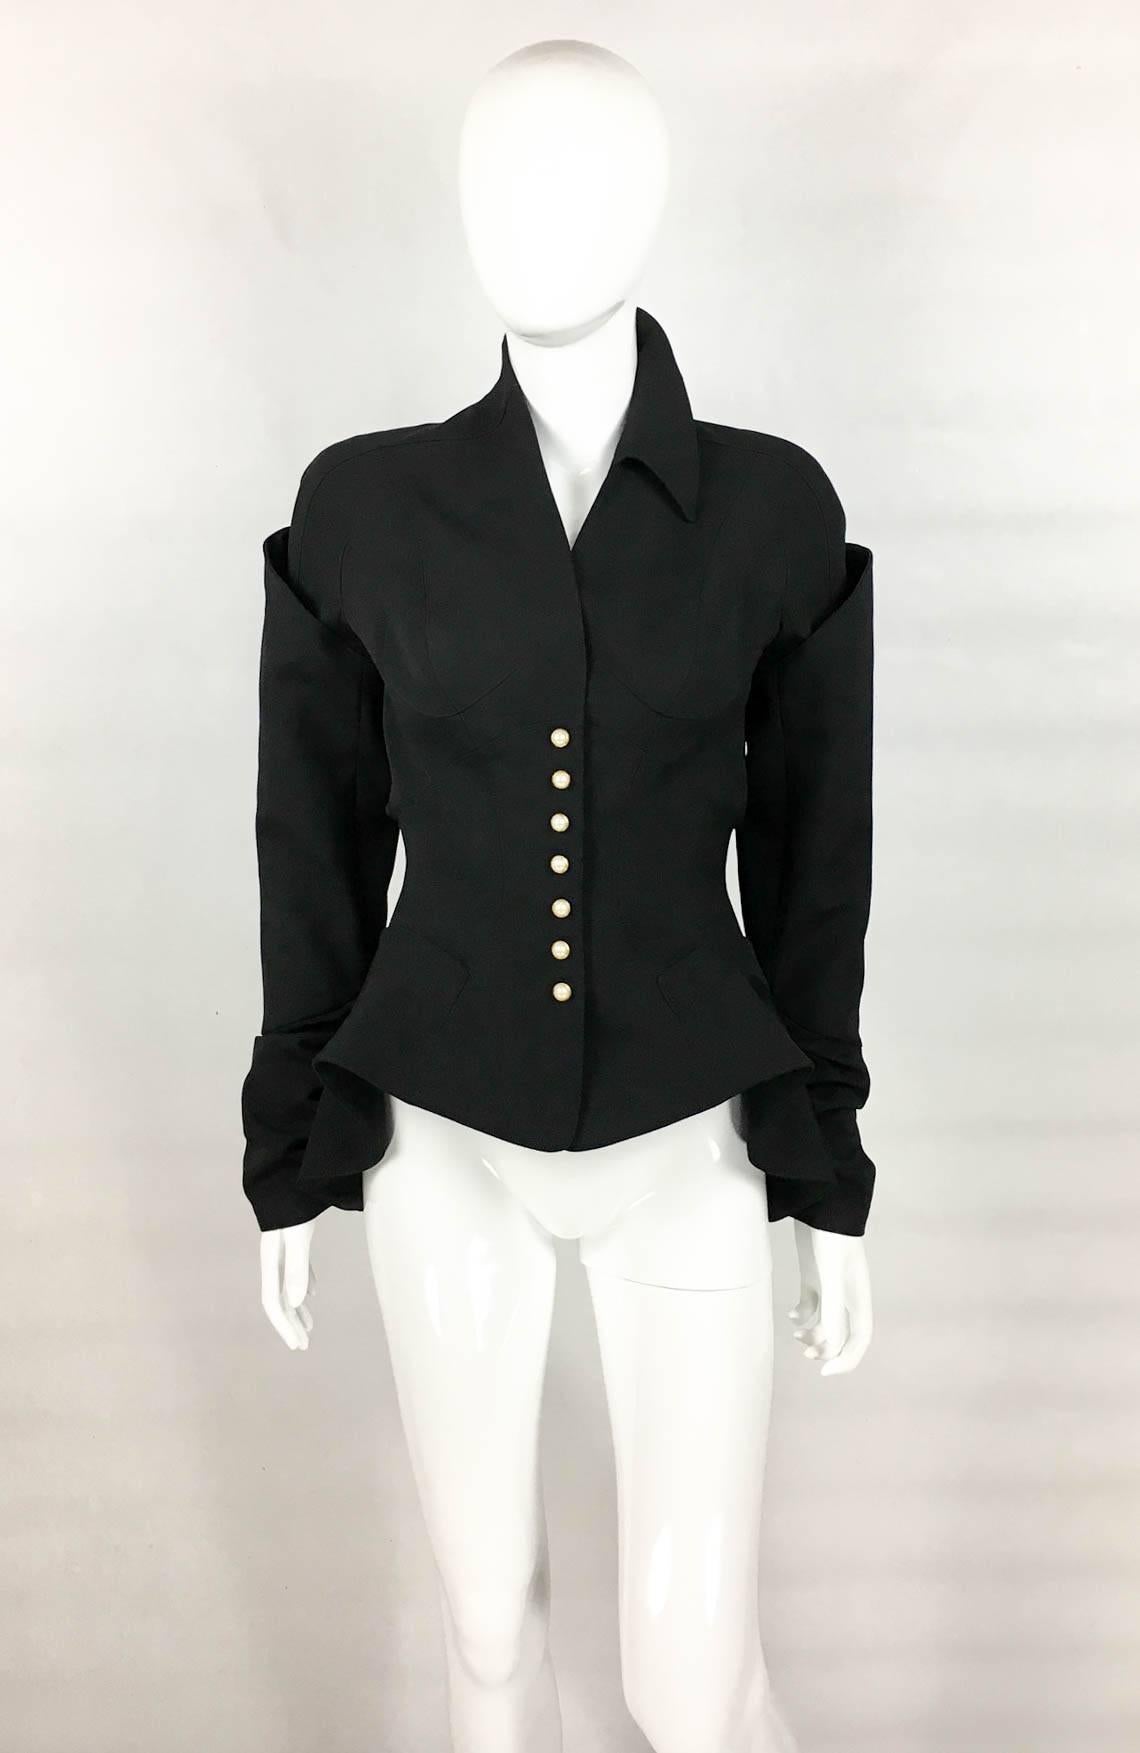 Important Vintage Thierry Mugler Wool Jacket (runway look). This absolutely fabulous architectural jacket by Mugler is made in wool gabardine and dates back from his iconic Fall/Winter 1995/1996 collection (see runway pics for identical piece). It